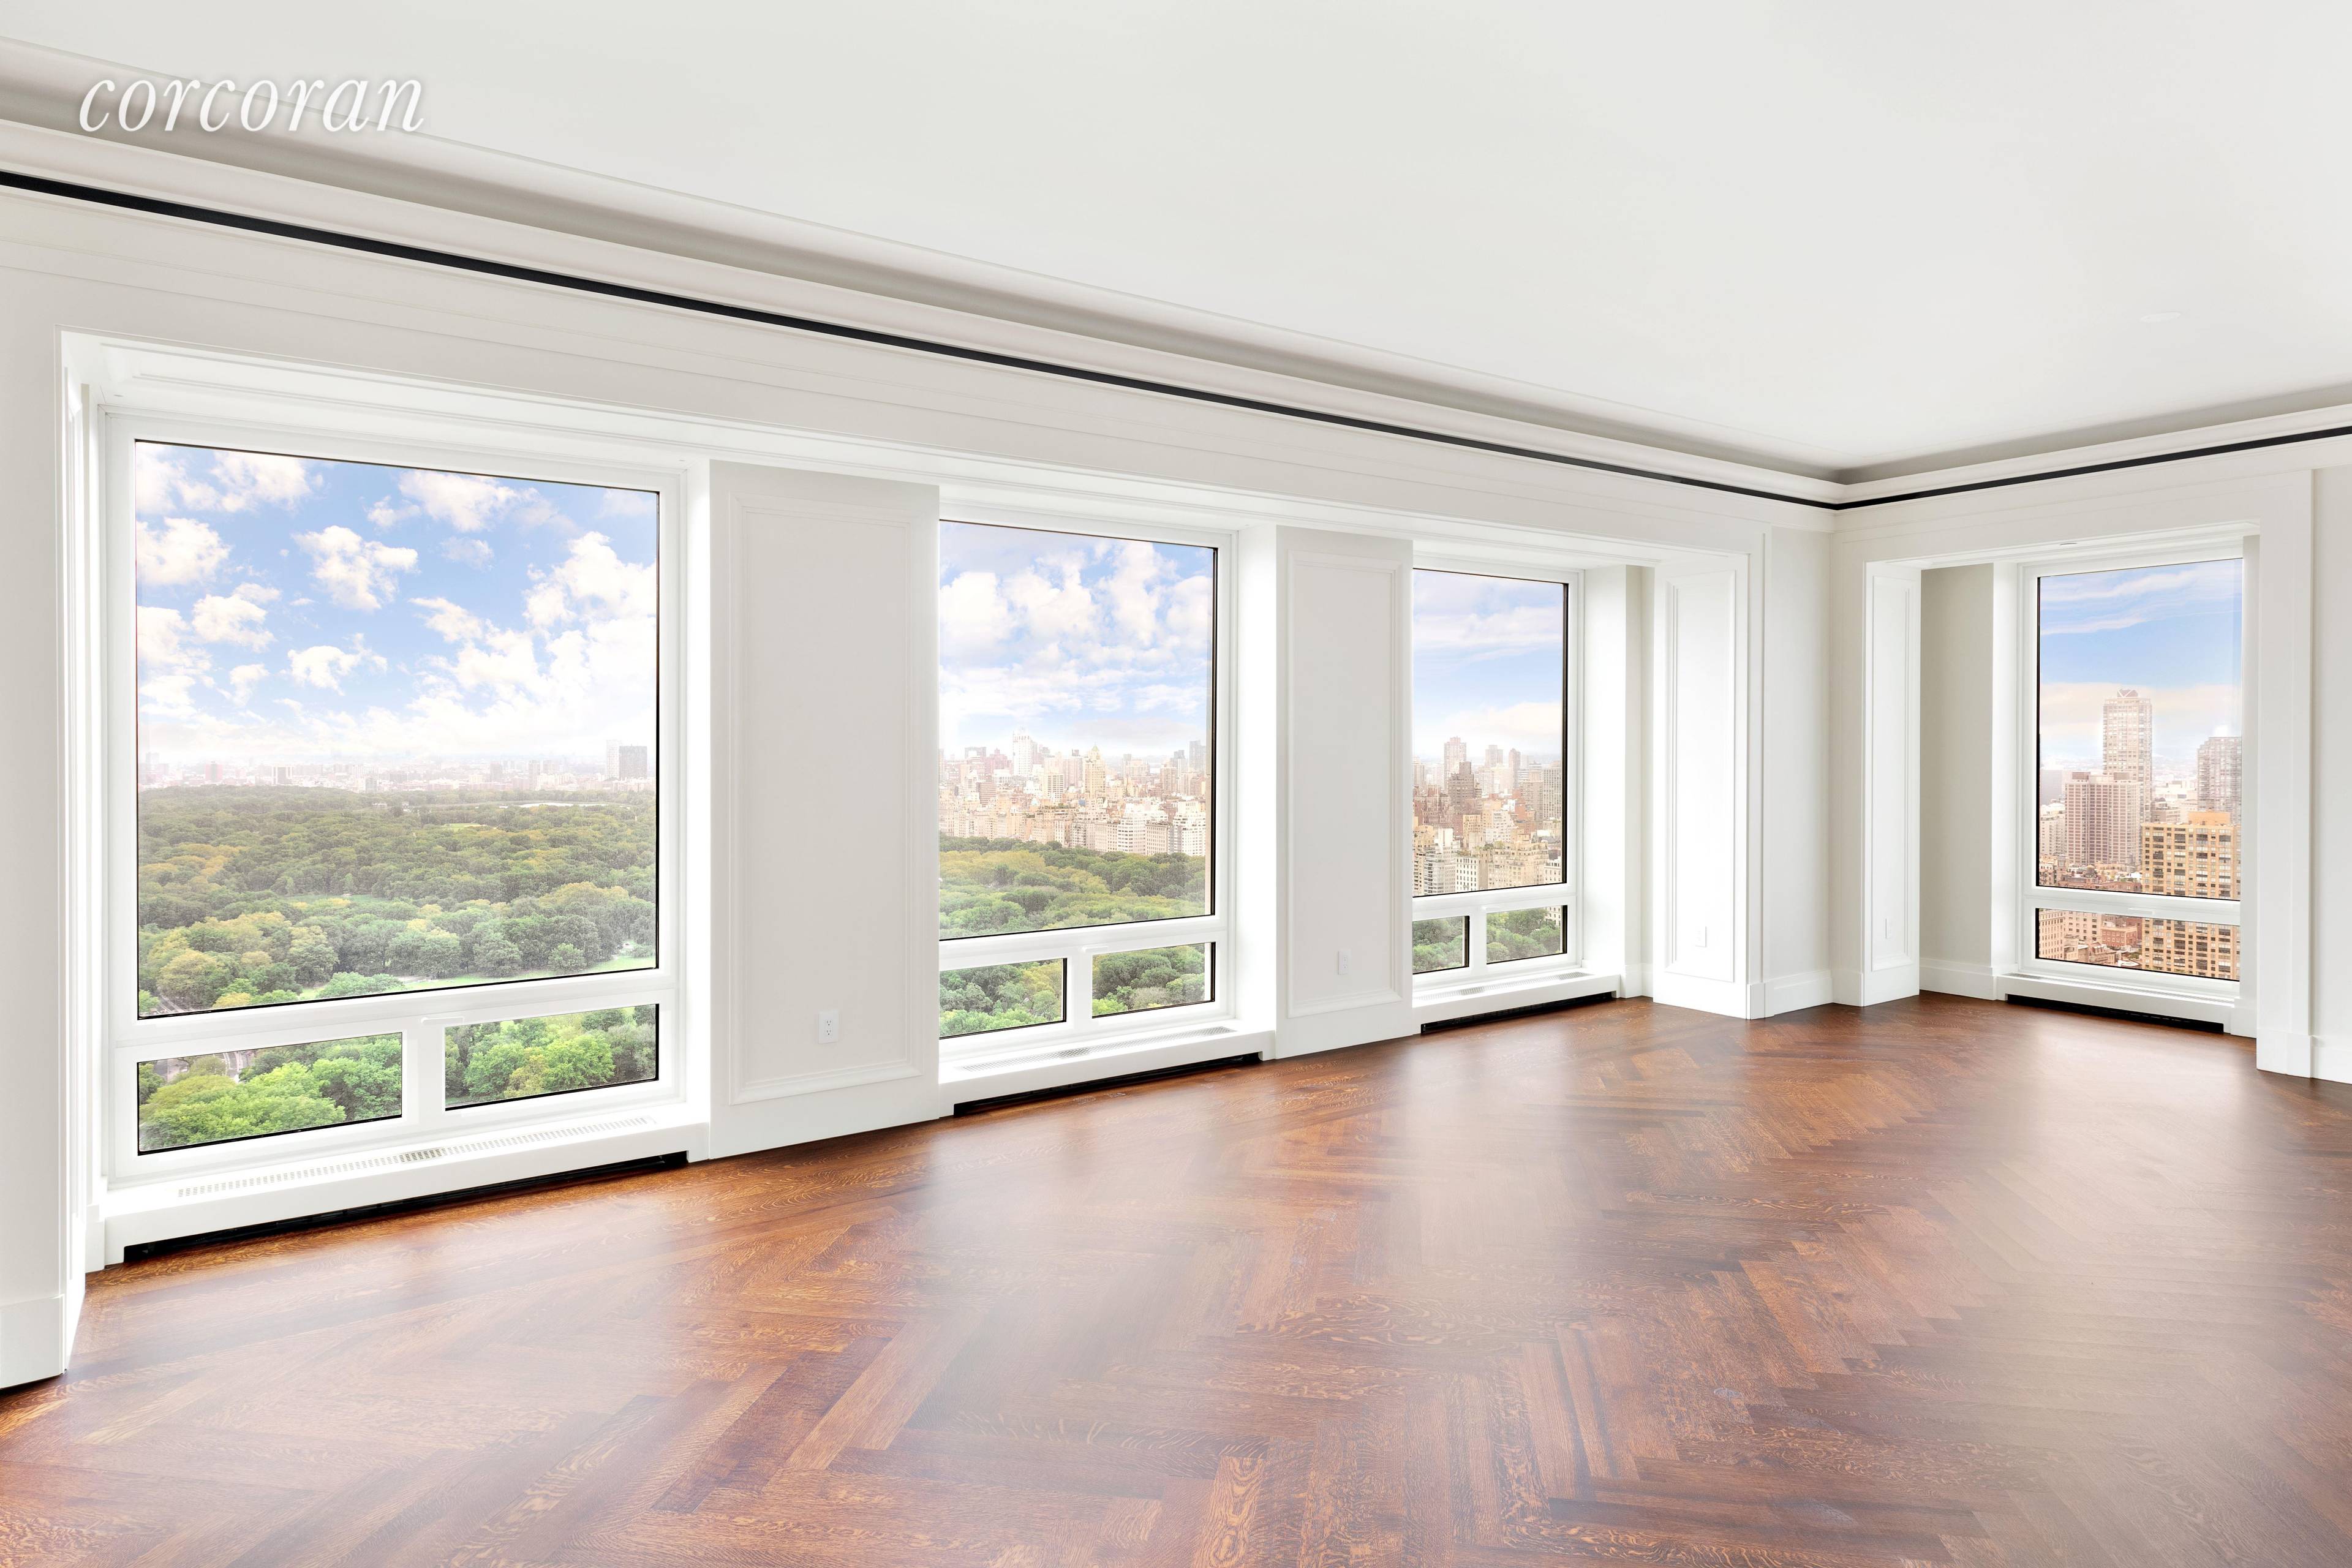 Tower Residence 39B Three Bedrooms Three Baths One Powder Room Be one of the first to reside in New YorkA s new and preeminent building, located directly on Central Park.